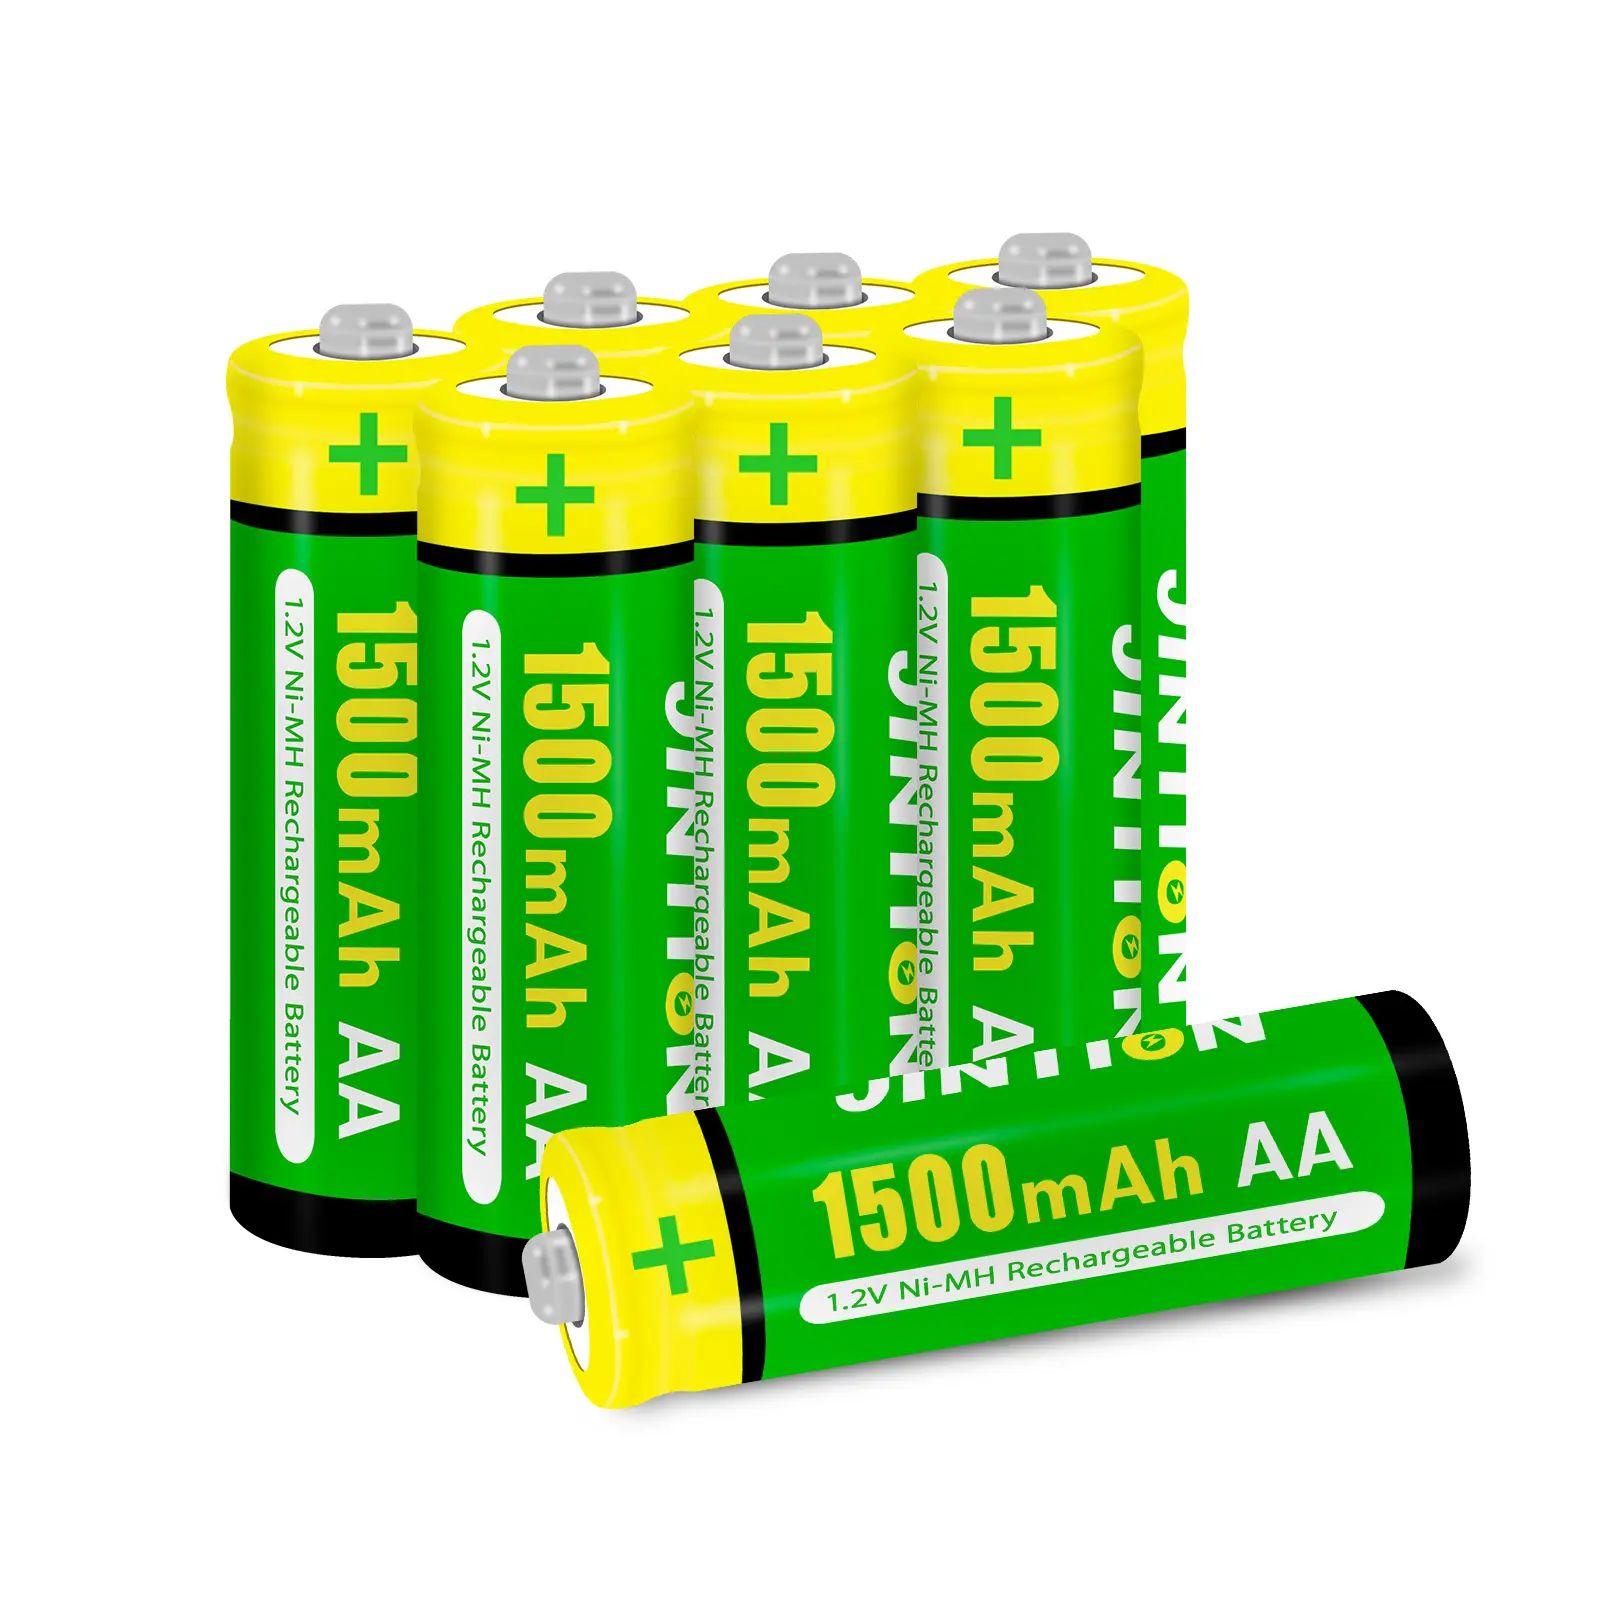 High temperature ni-mh battery AA 1500mAh 1.2V nickel metal hydride rechargeable batteries